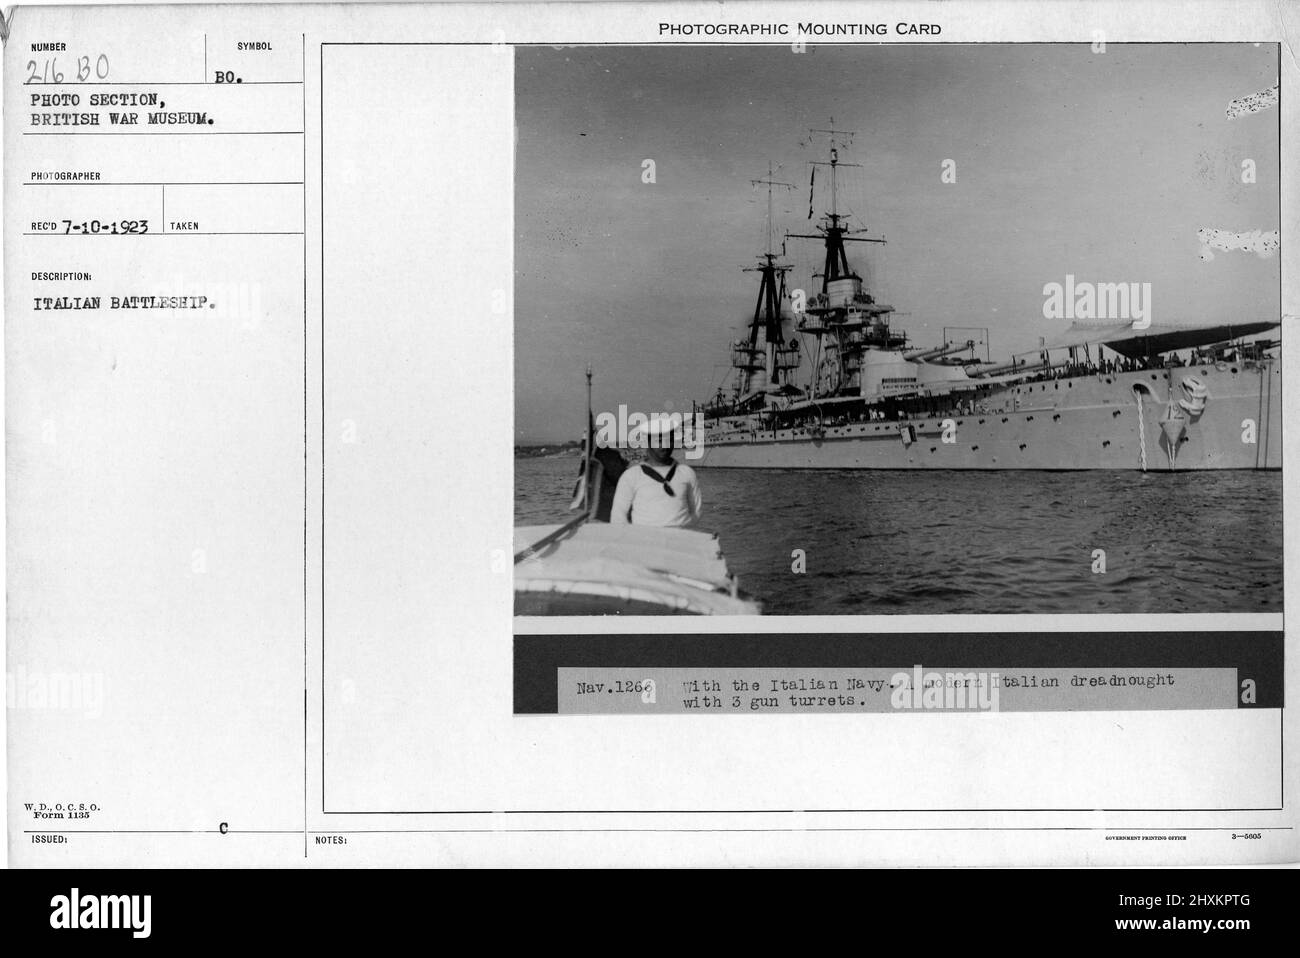 Italian Battleship. Collection of World War I Photographs, 1914-1918 that depict the military activities of British and other nation's armed forces and personnel during World War I. Stock Photo